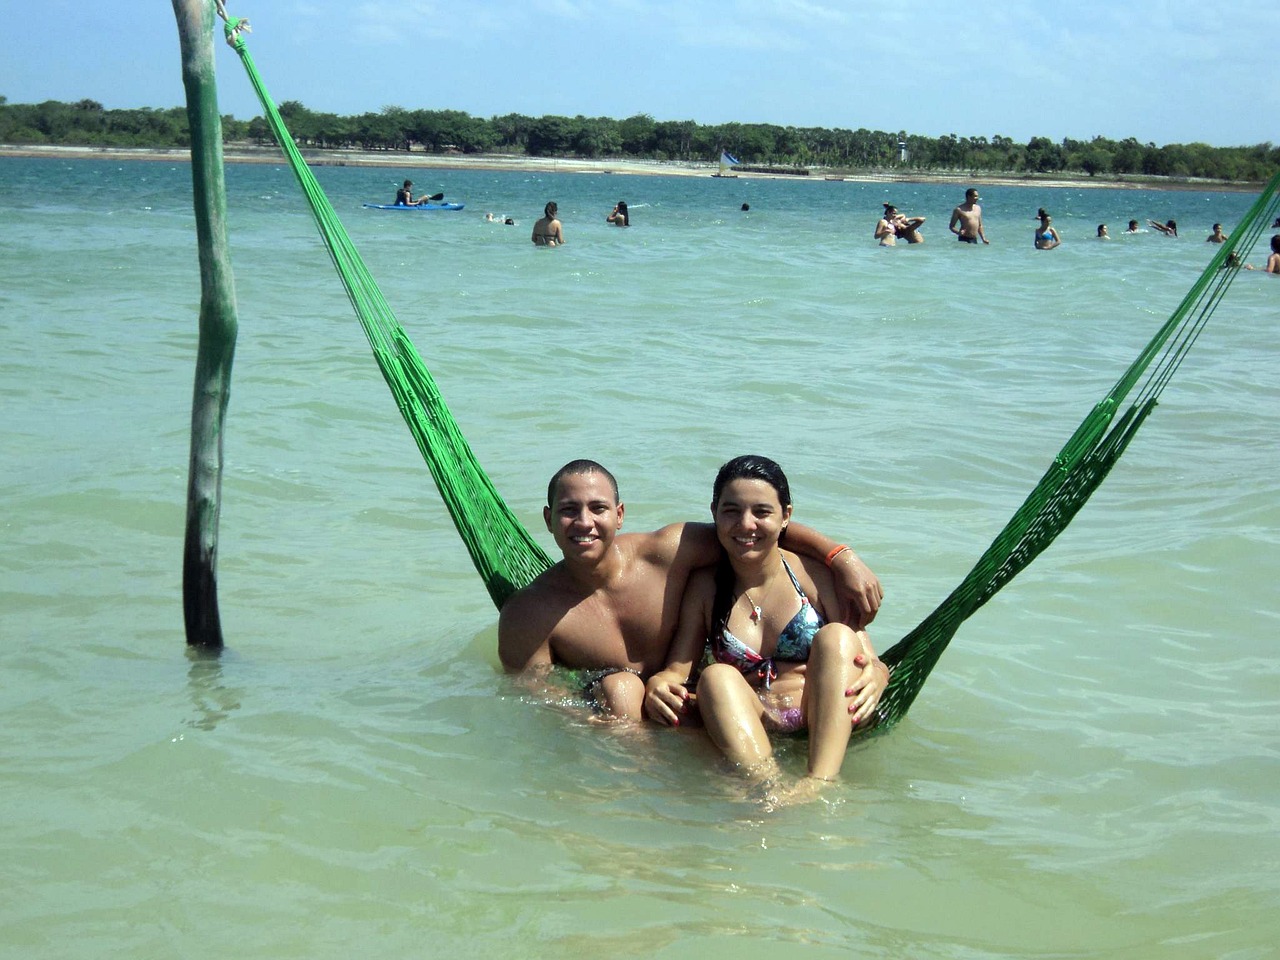 5 Days of Adventure and Nature in Jericoacoara